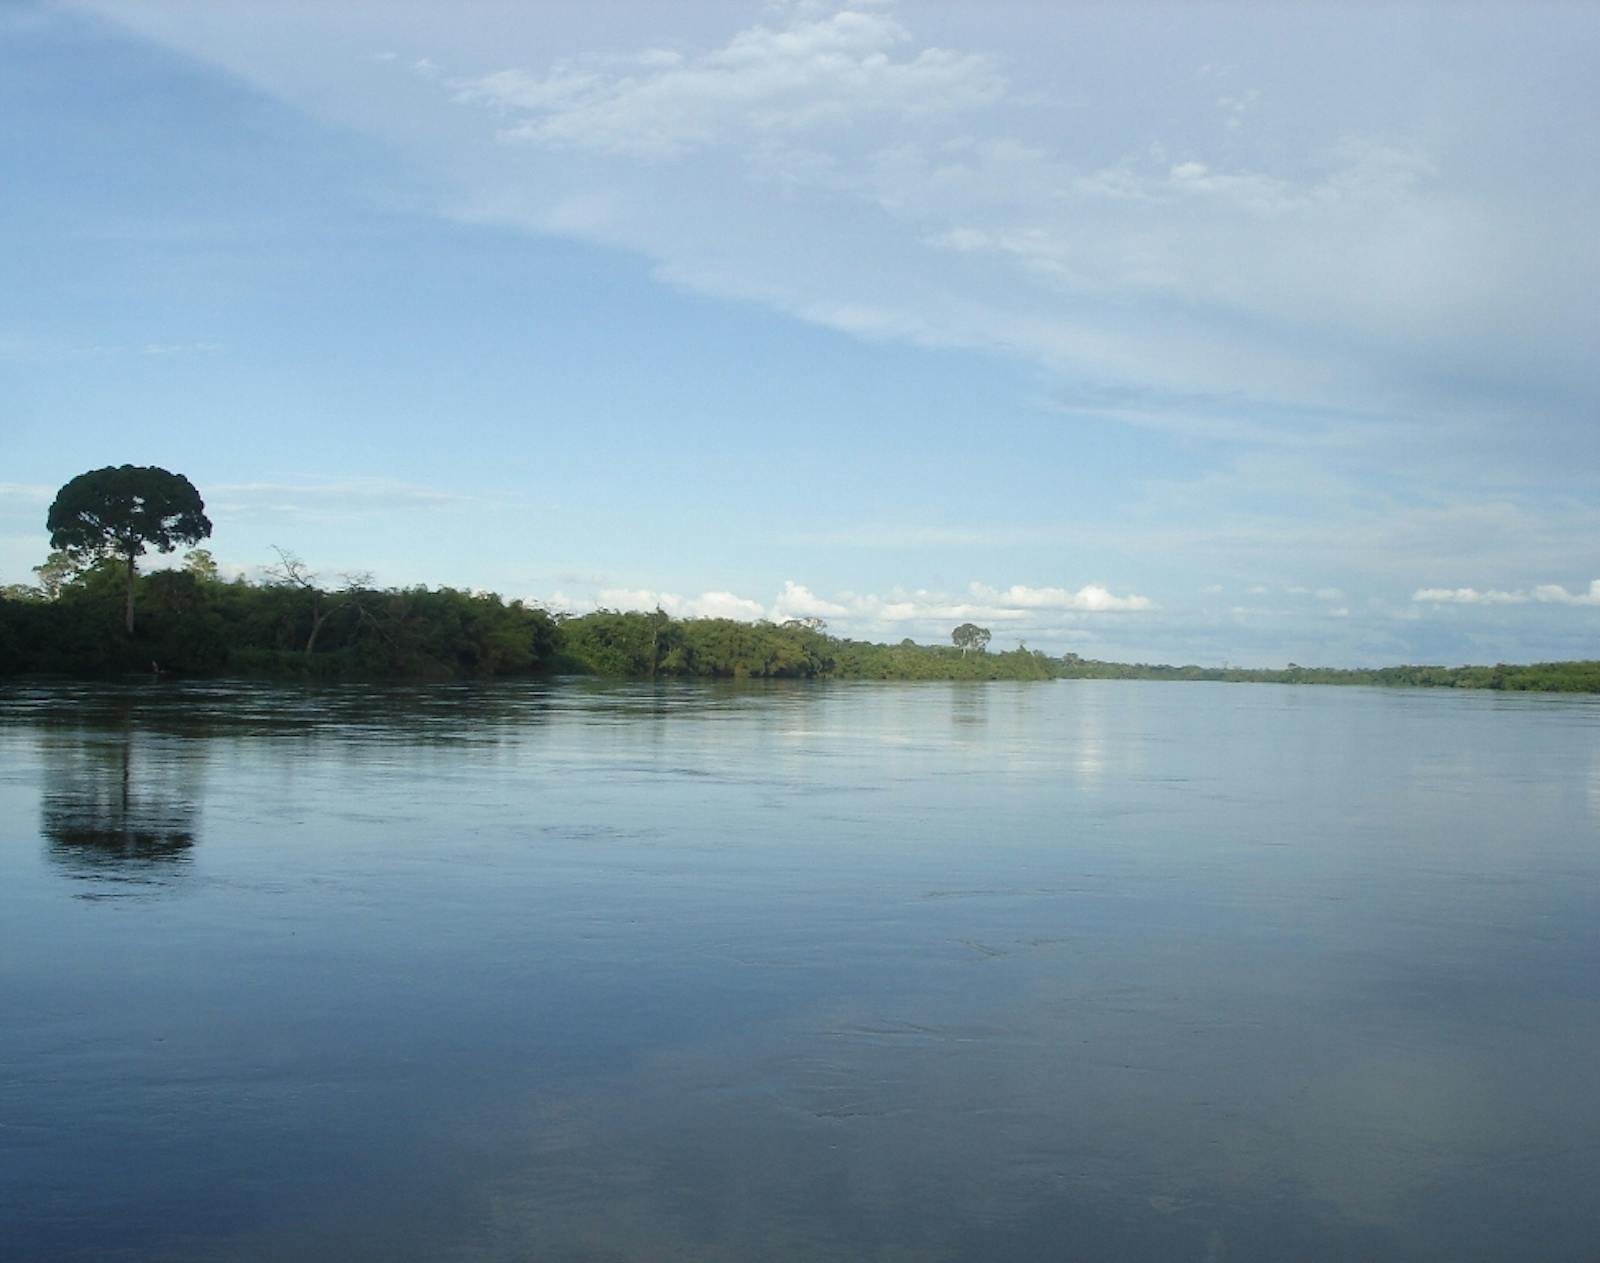 Western Congolian Swamp Forests